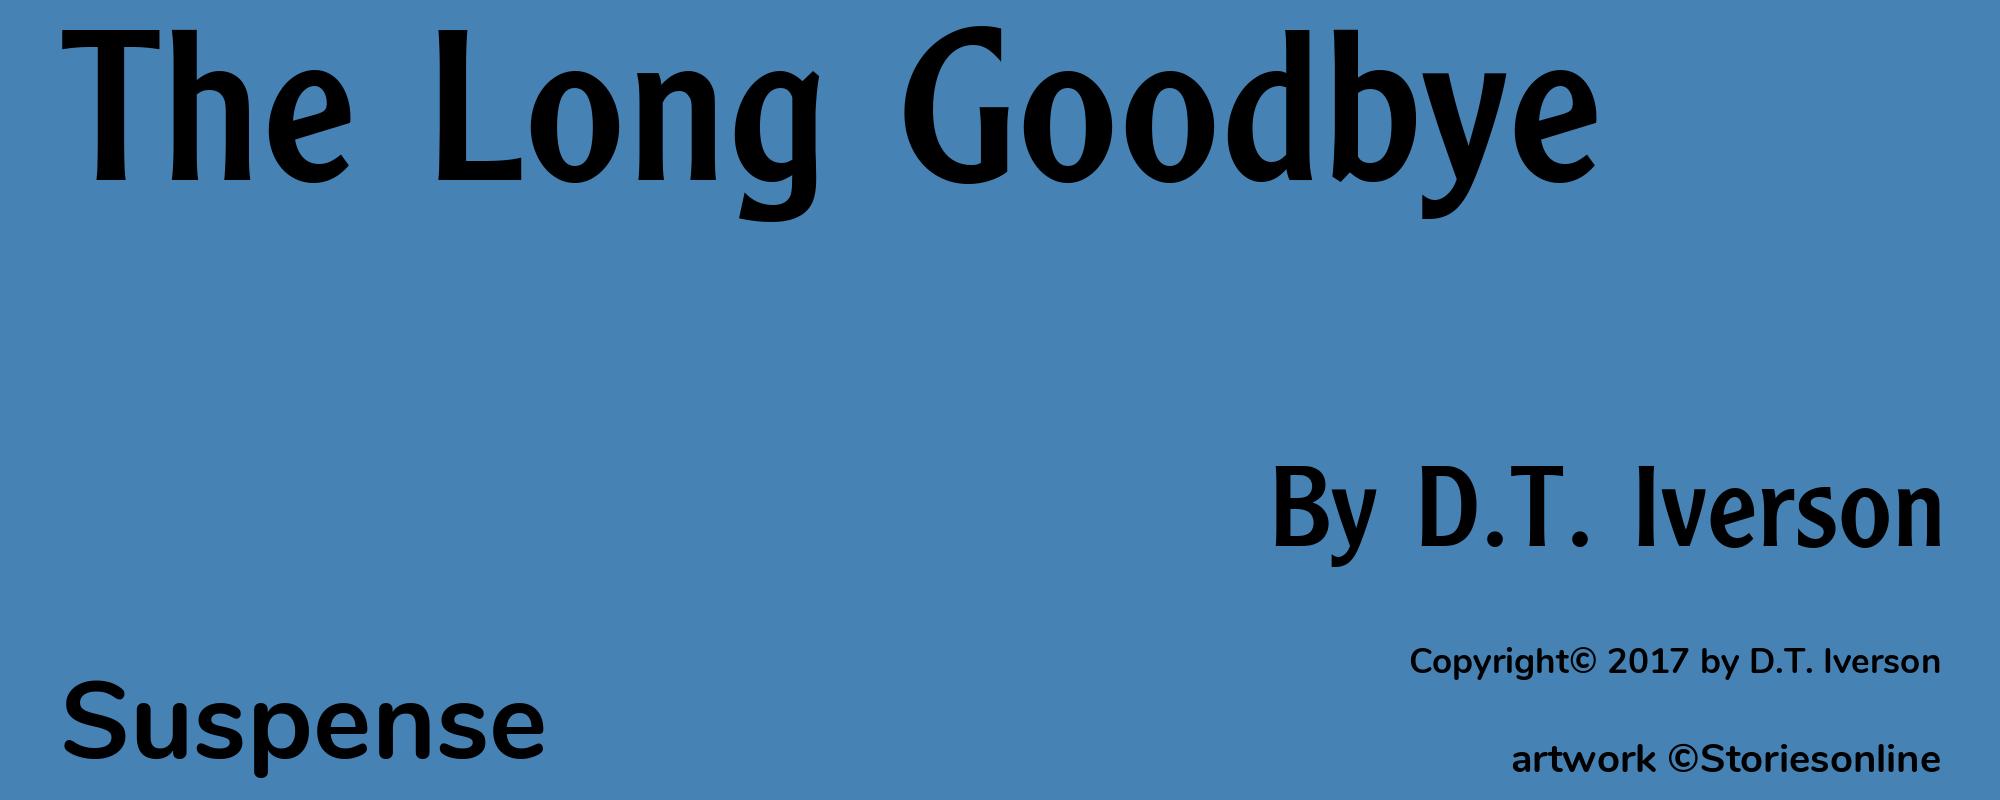 The Long Goodbye - Cover